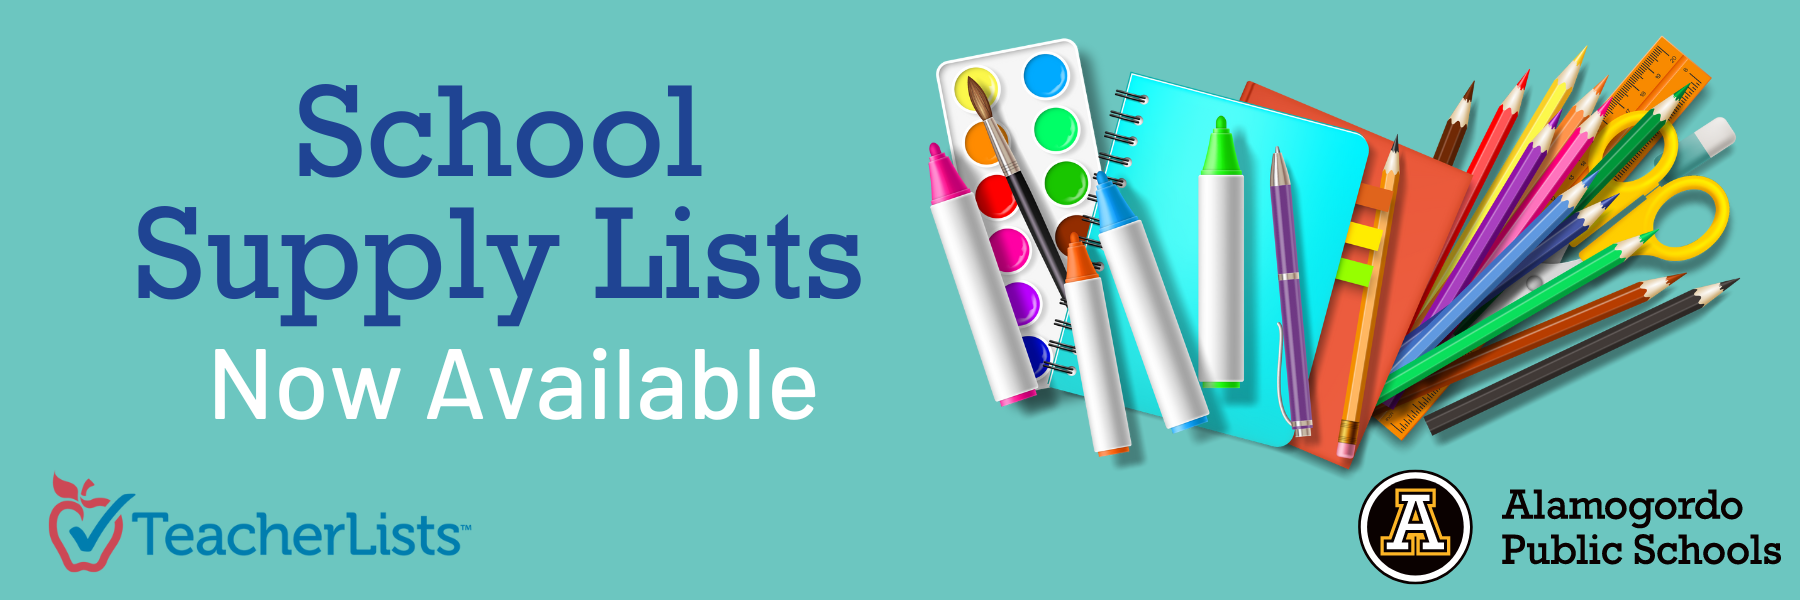 School Supply Lists Now Available 